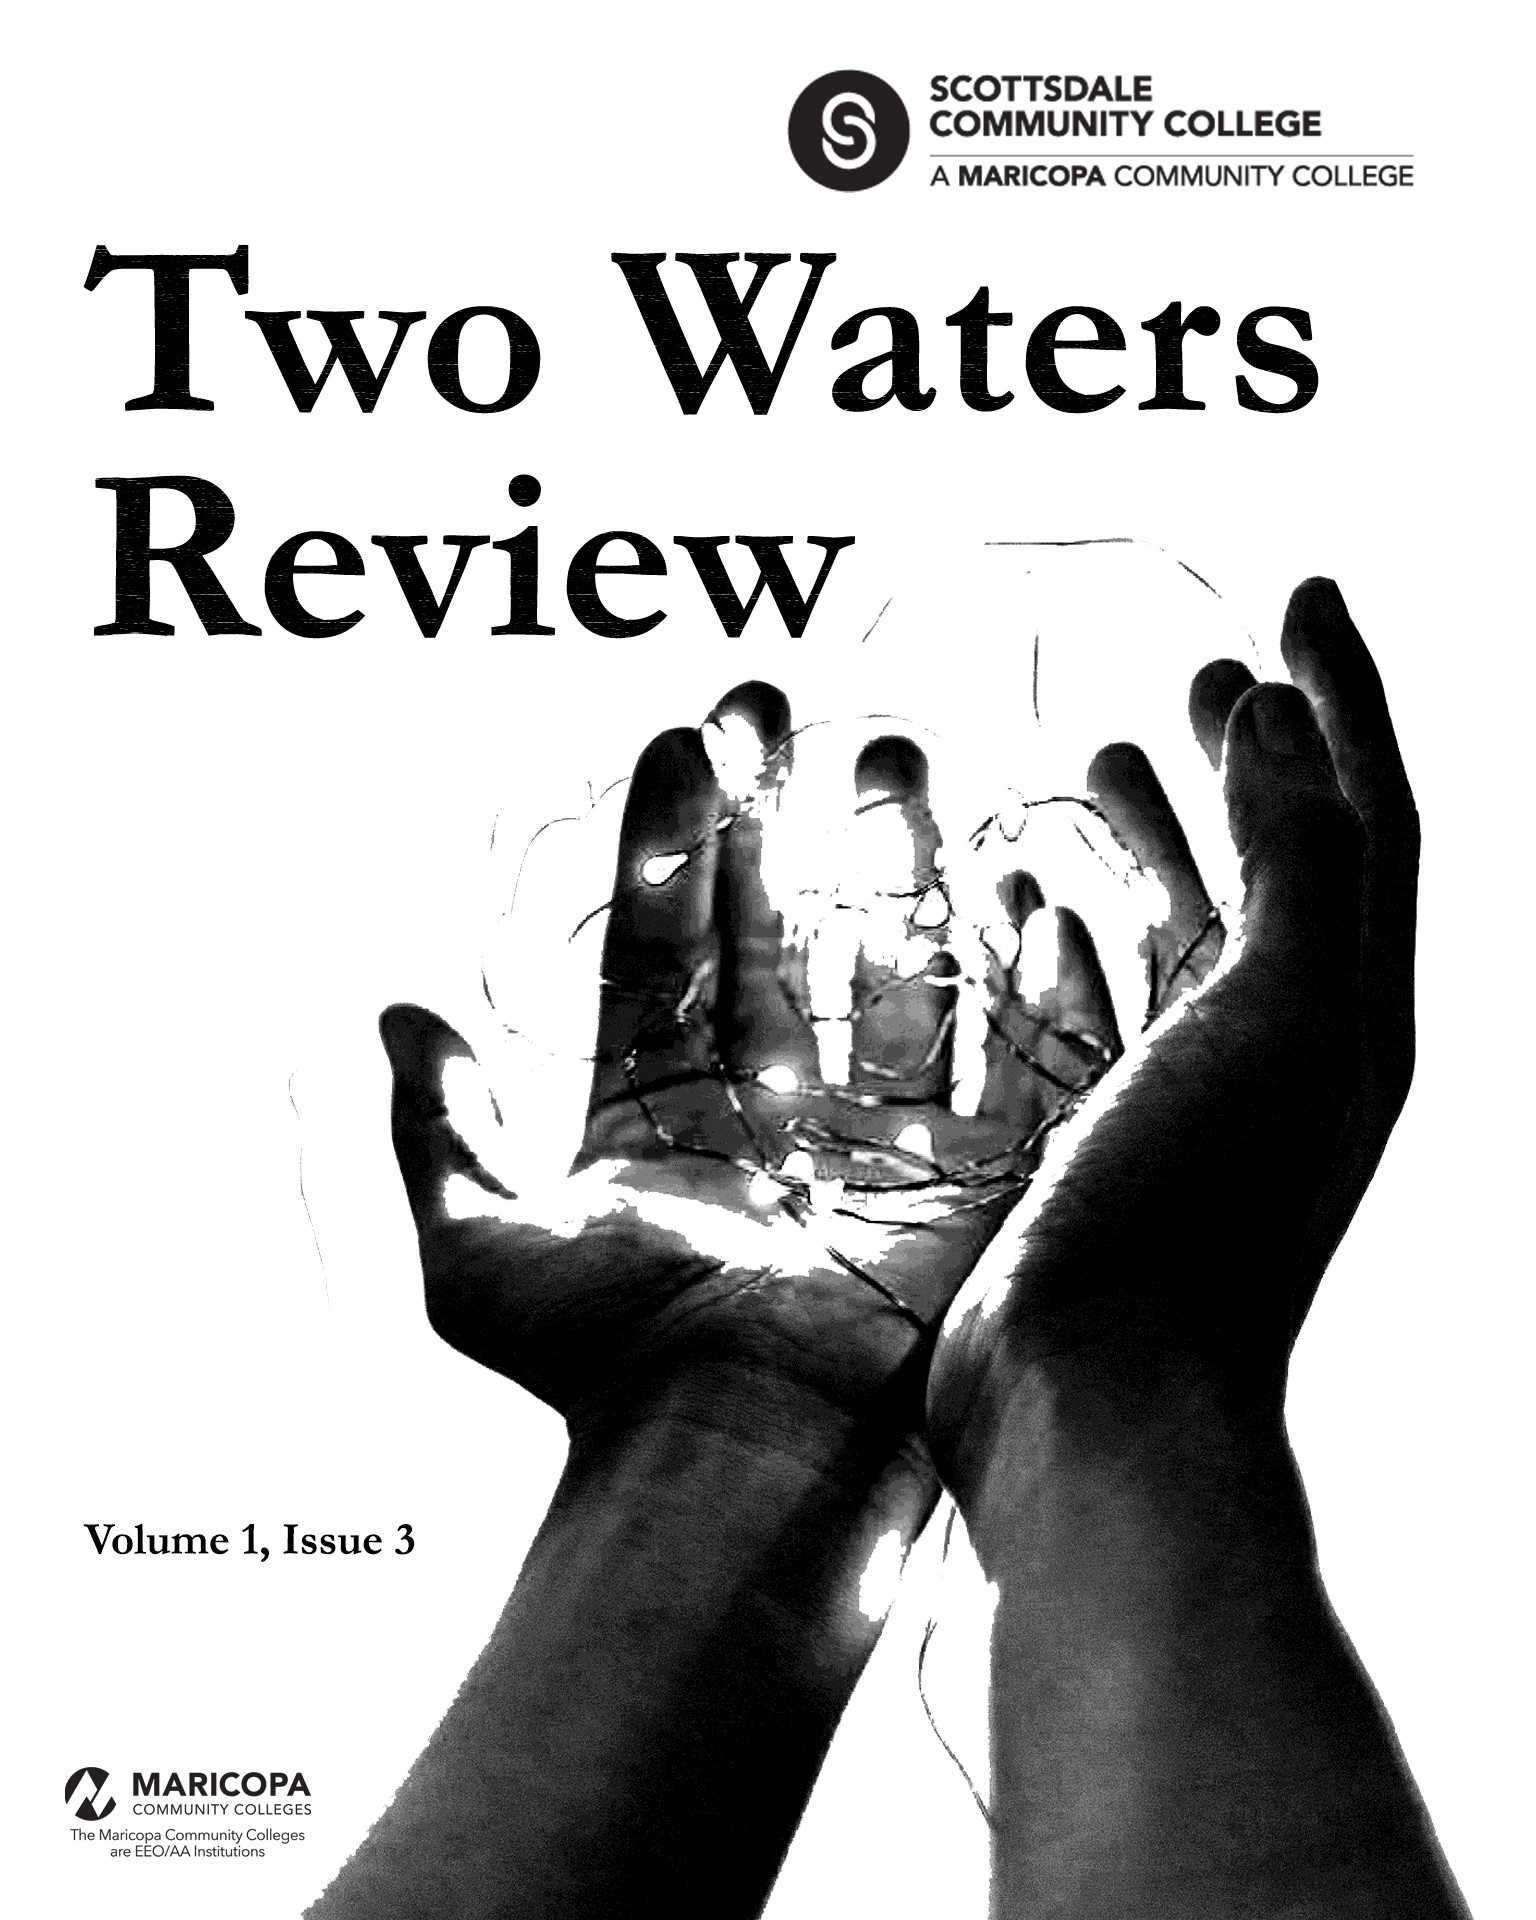 Two Waters Review 1.3 cover image showing hands holding up lights